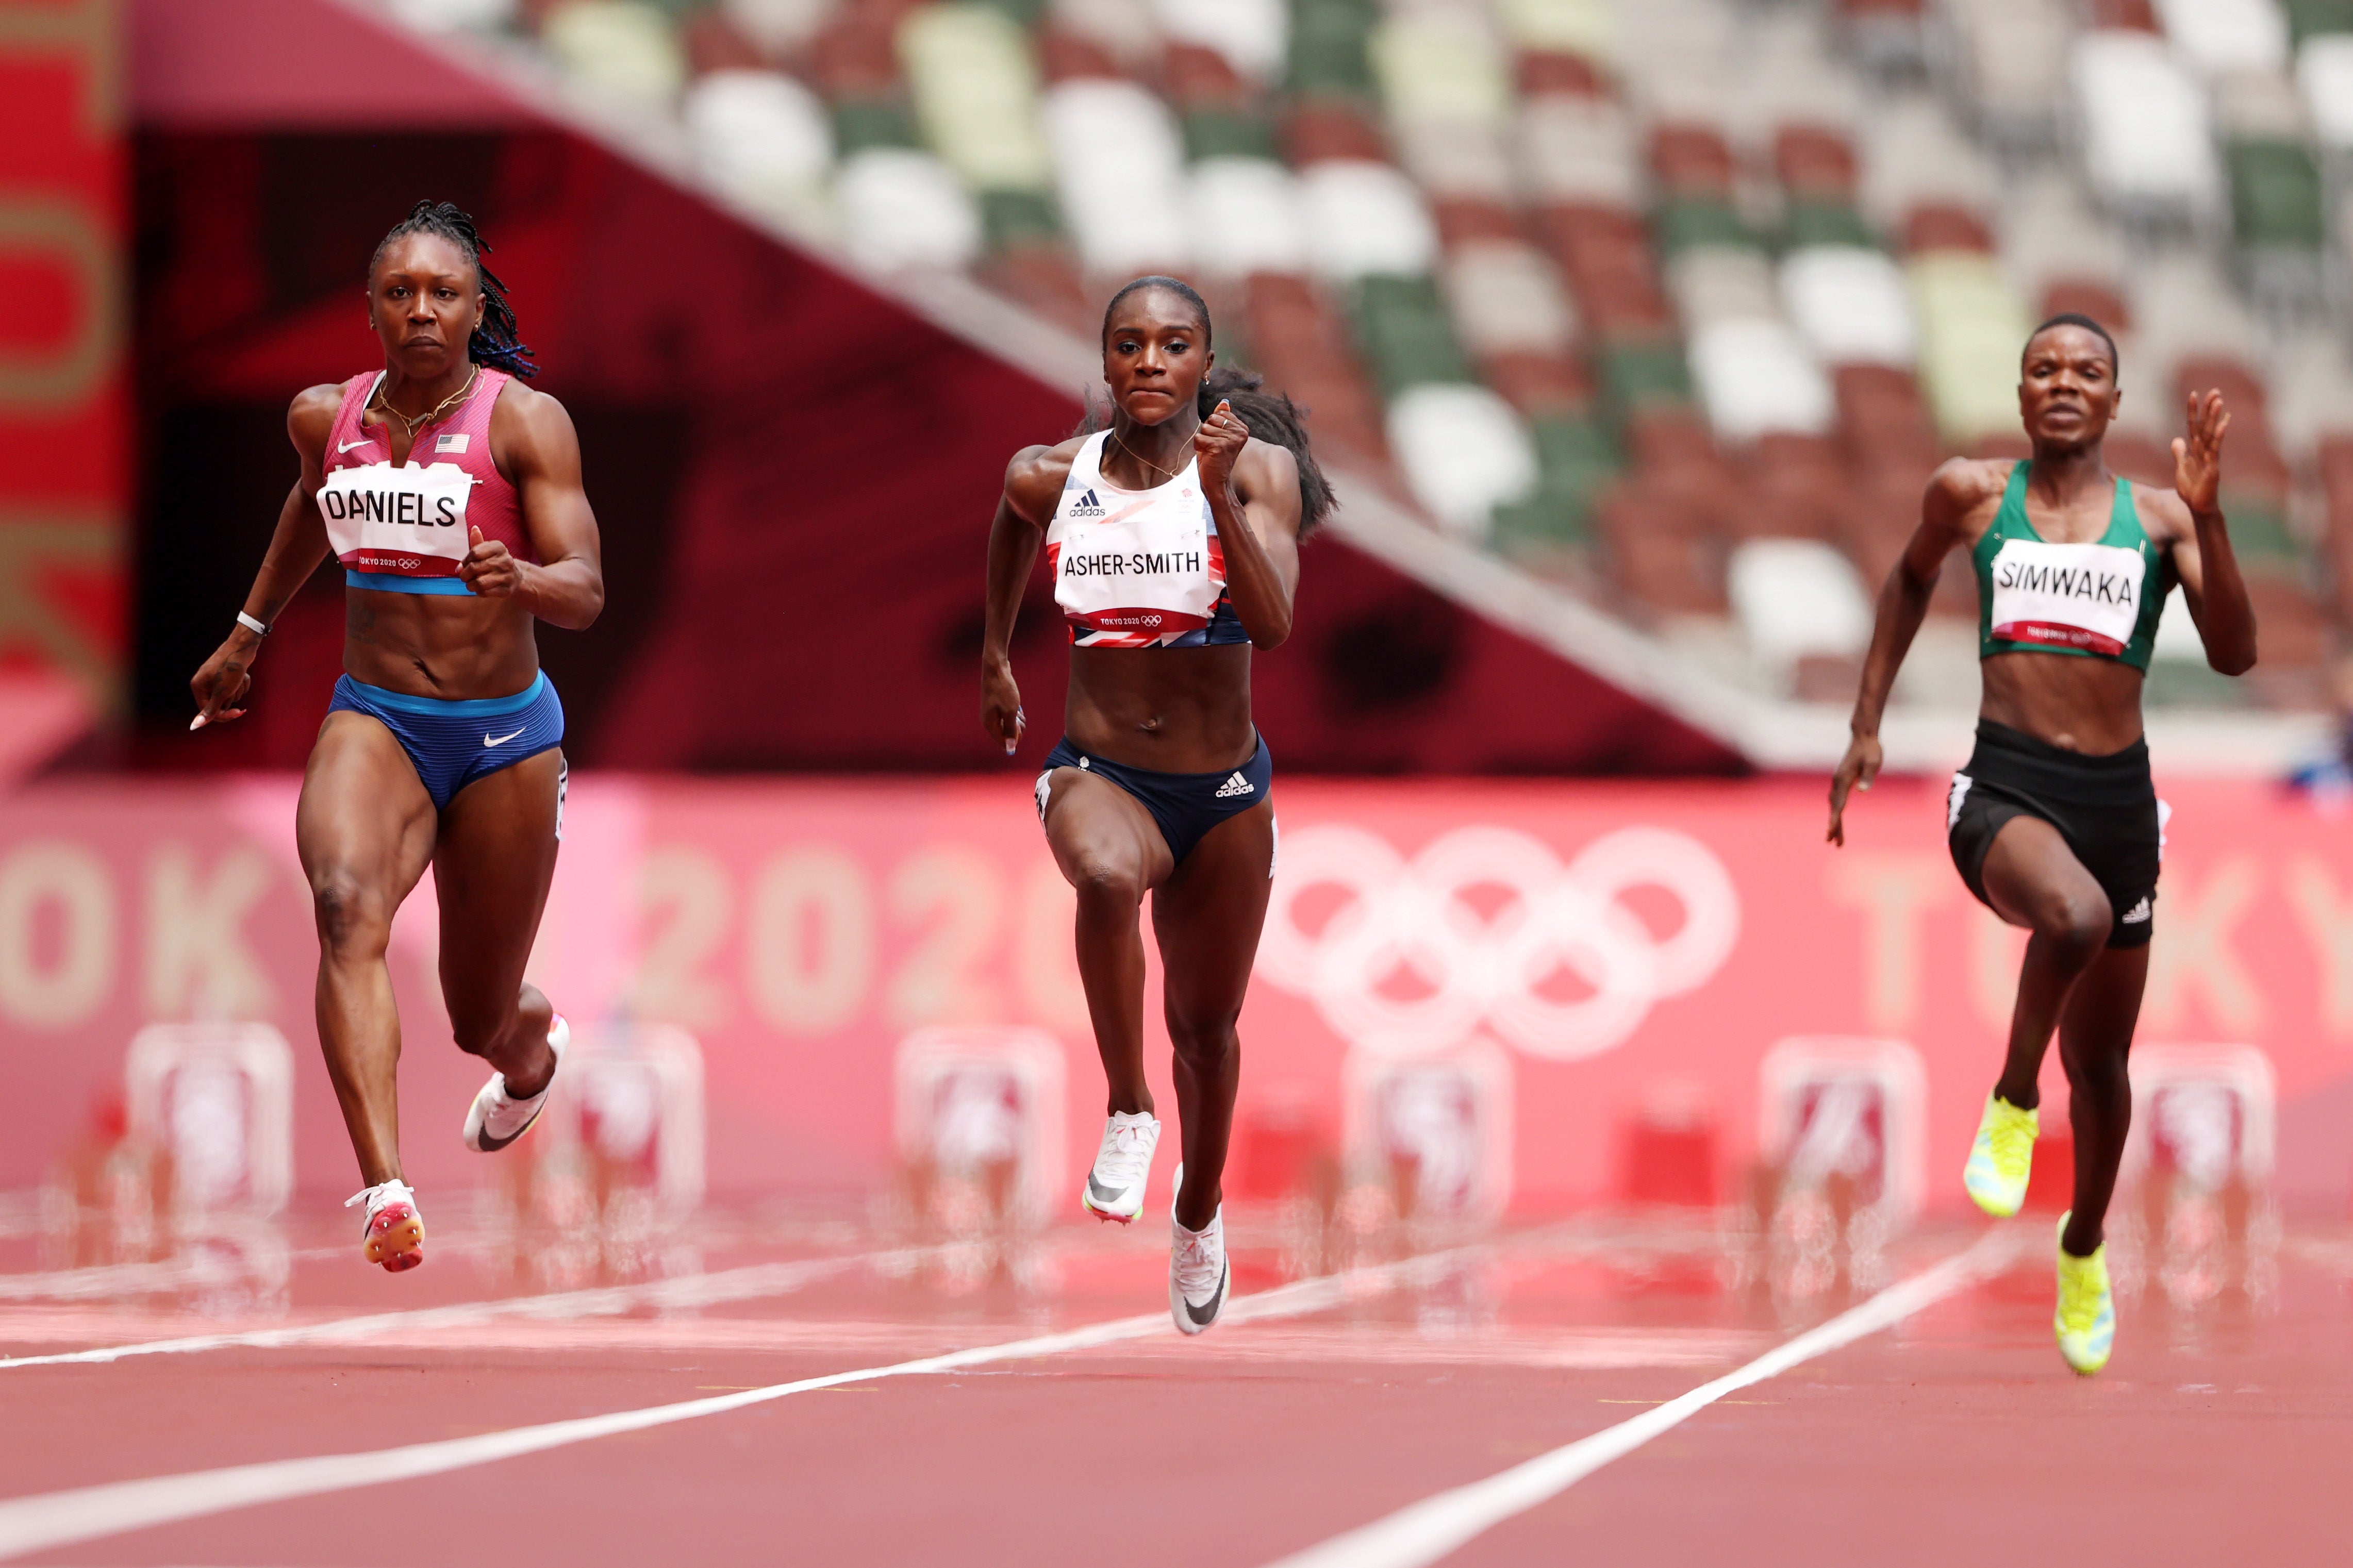 Dina Asher-Smith finished second in her 100m heat